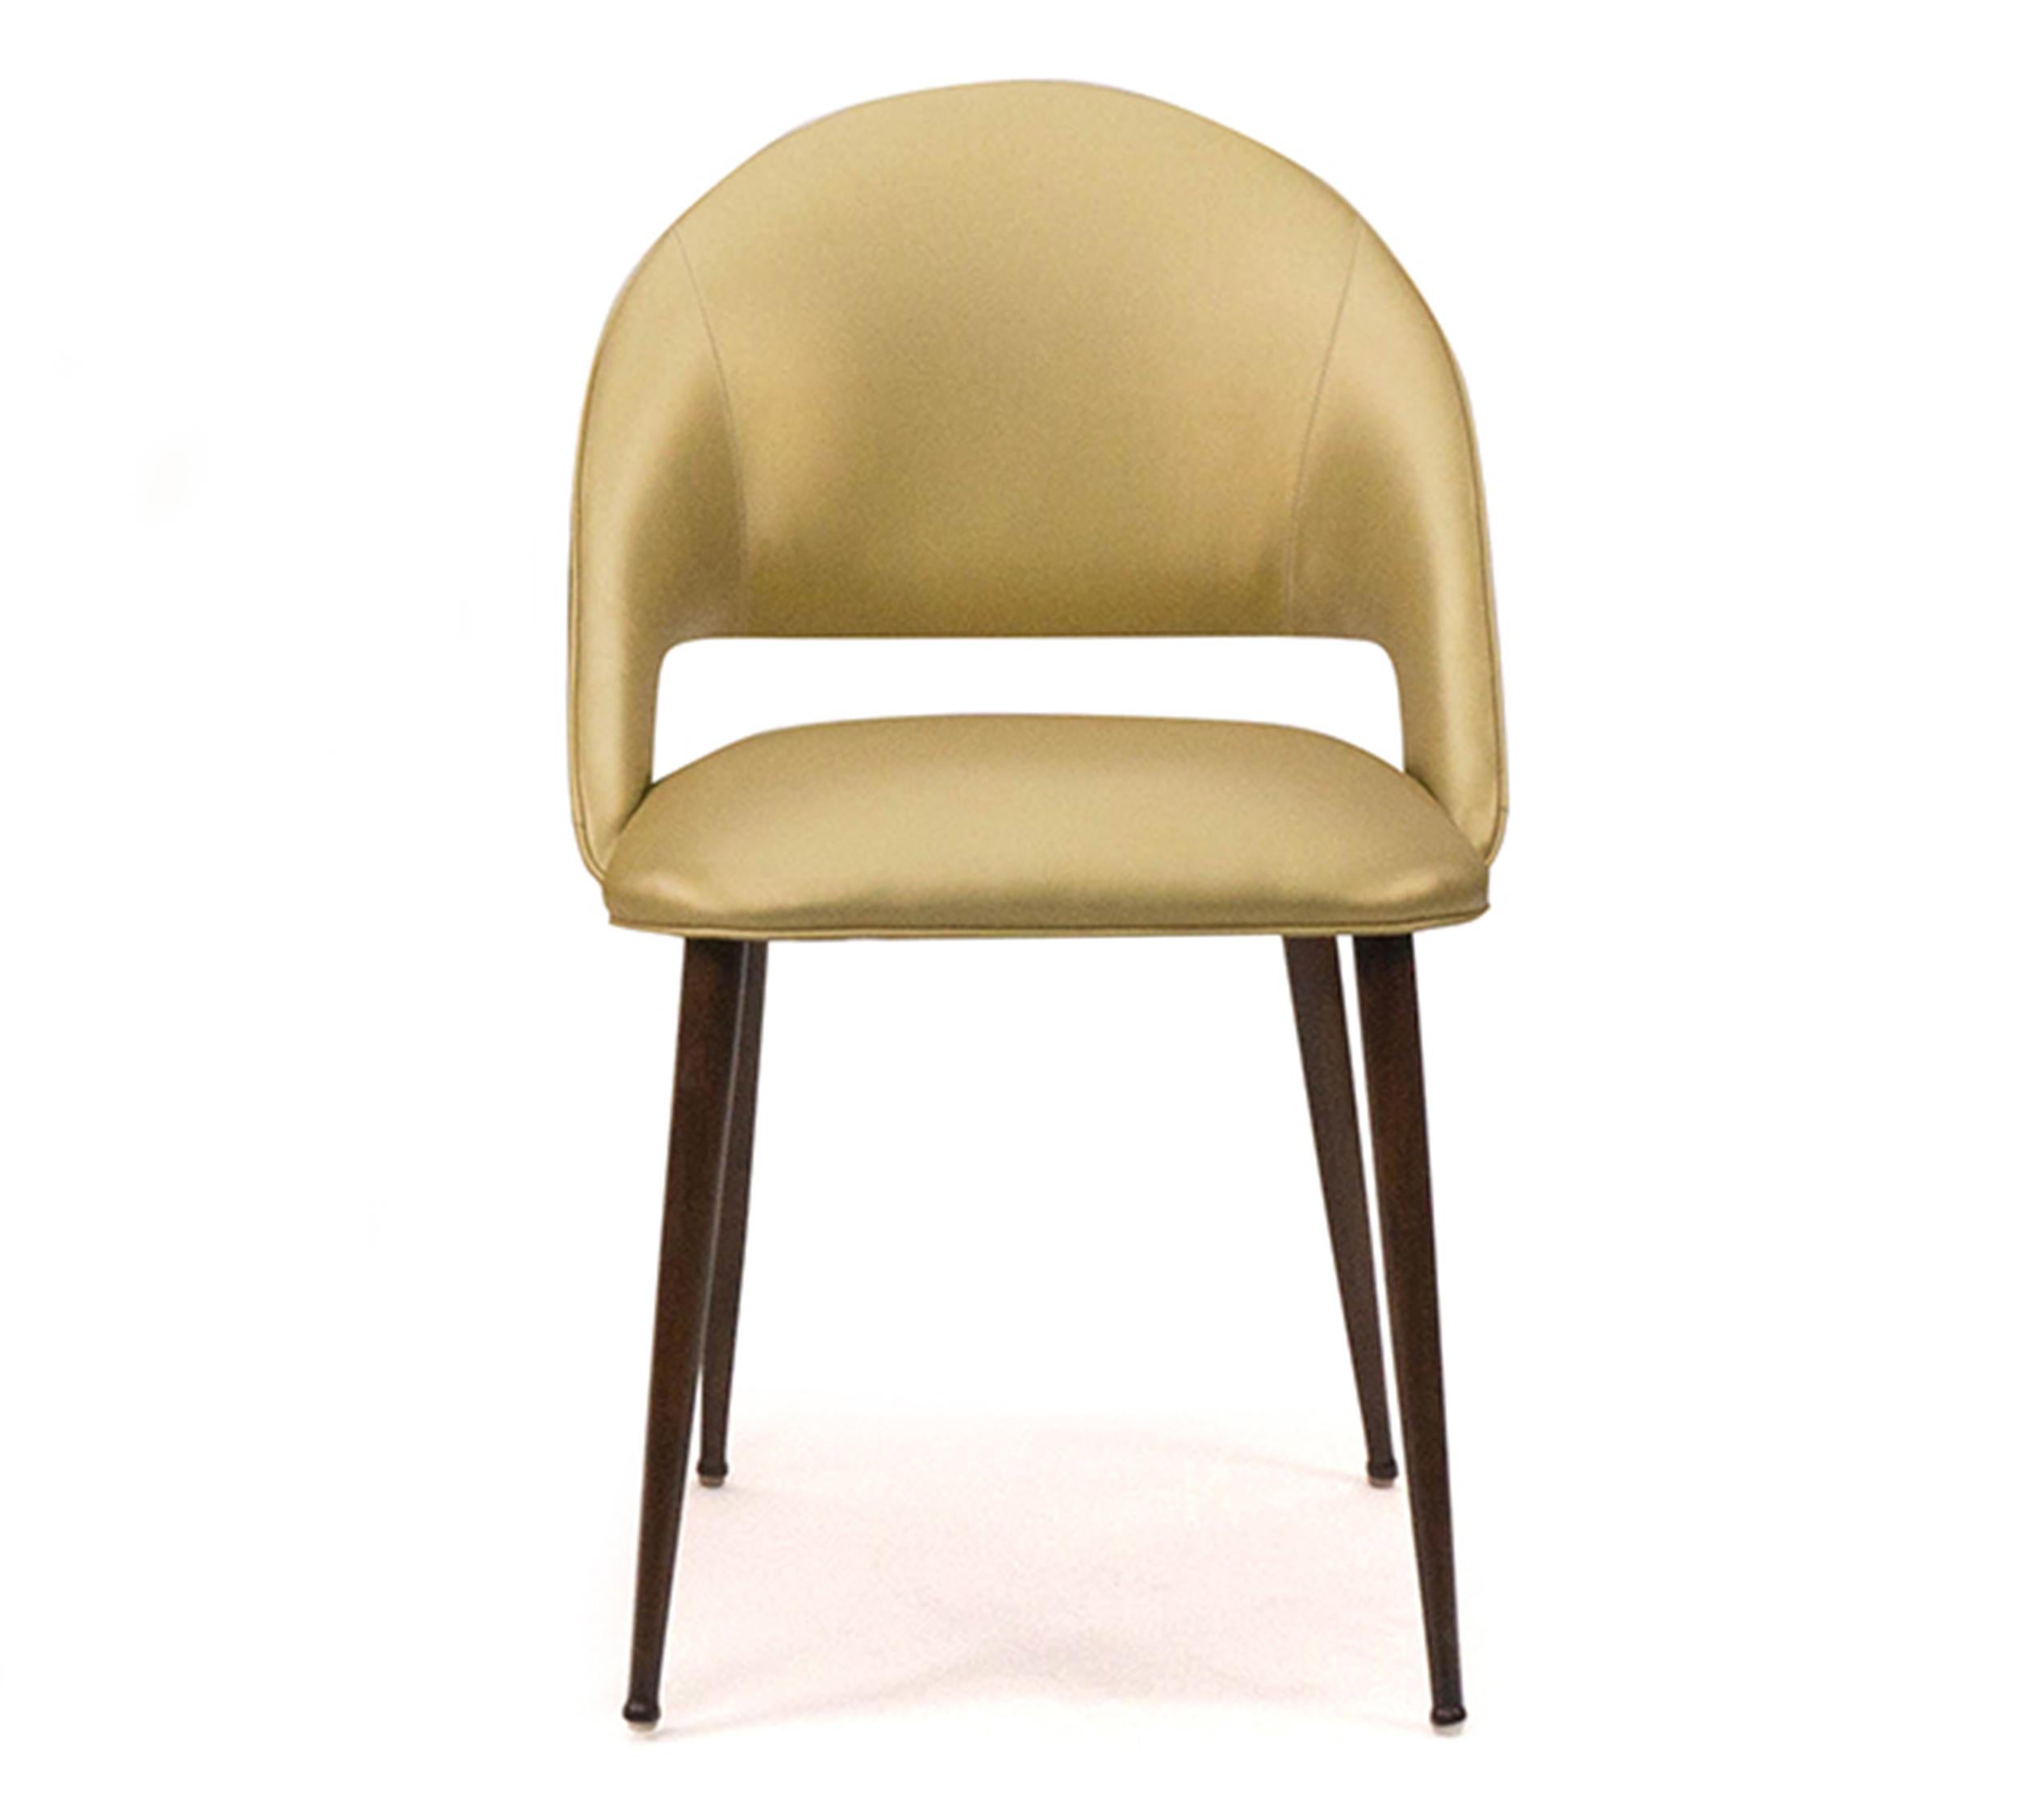 Art Deco inspired dining chair with round turned legs upholstered in a performance vinyl that comes in many colors. Features top-stitching detail. 

Available COM at $1300/ea.

Dimensions
Outside measurements: 22